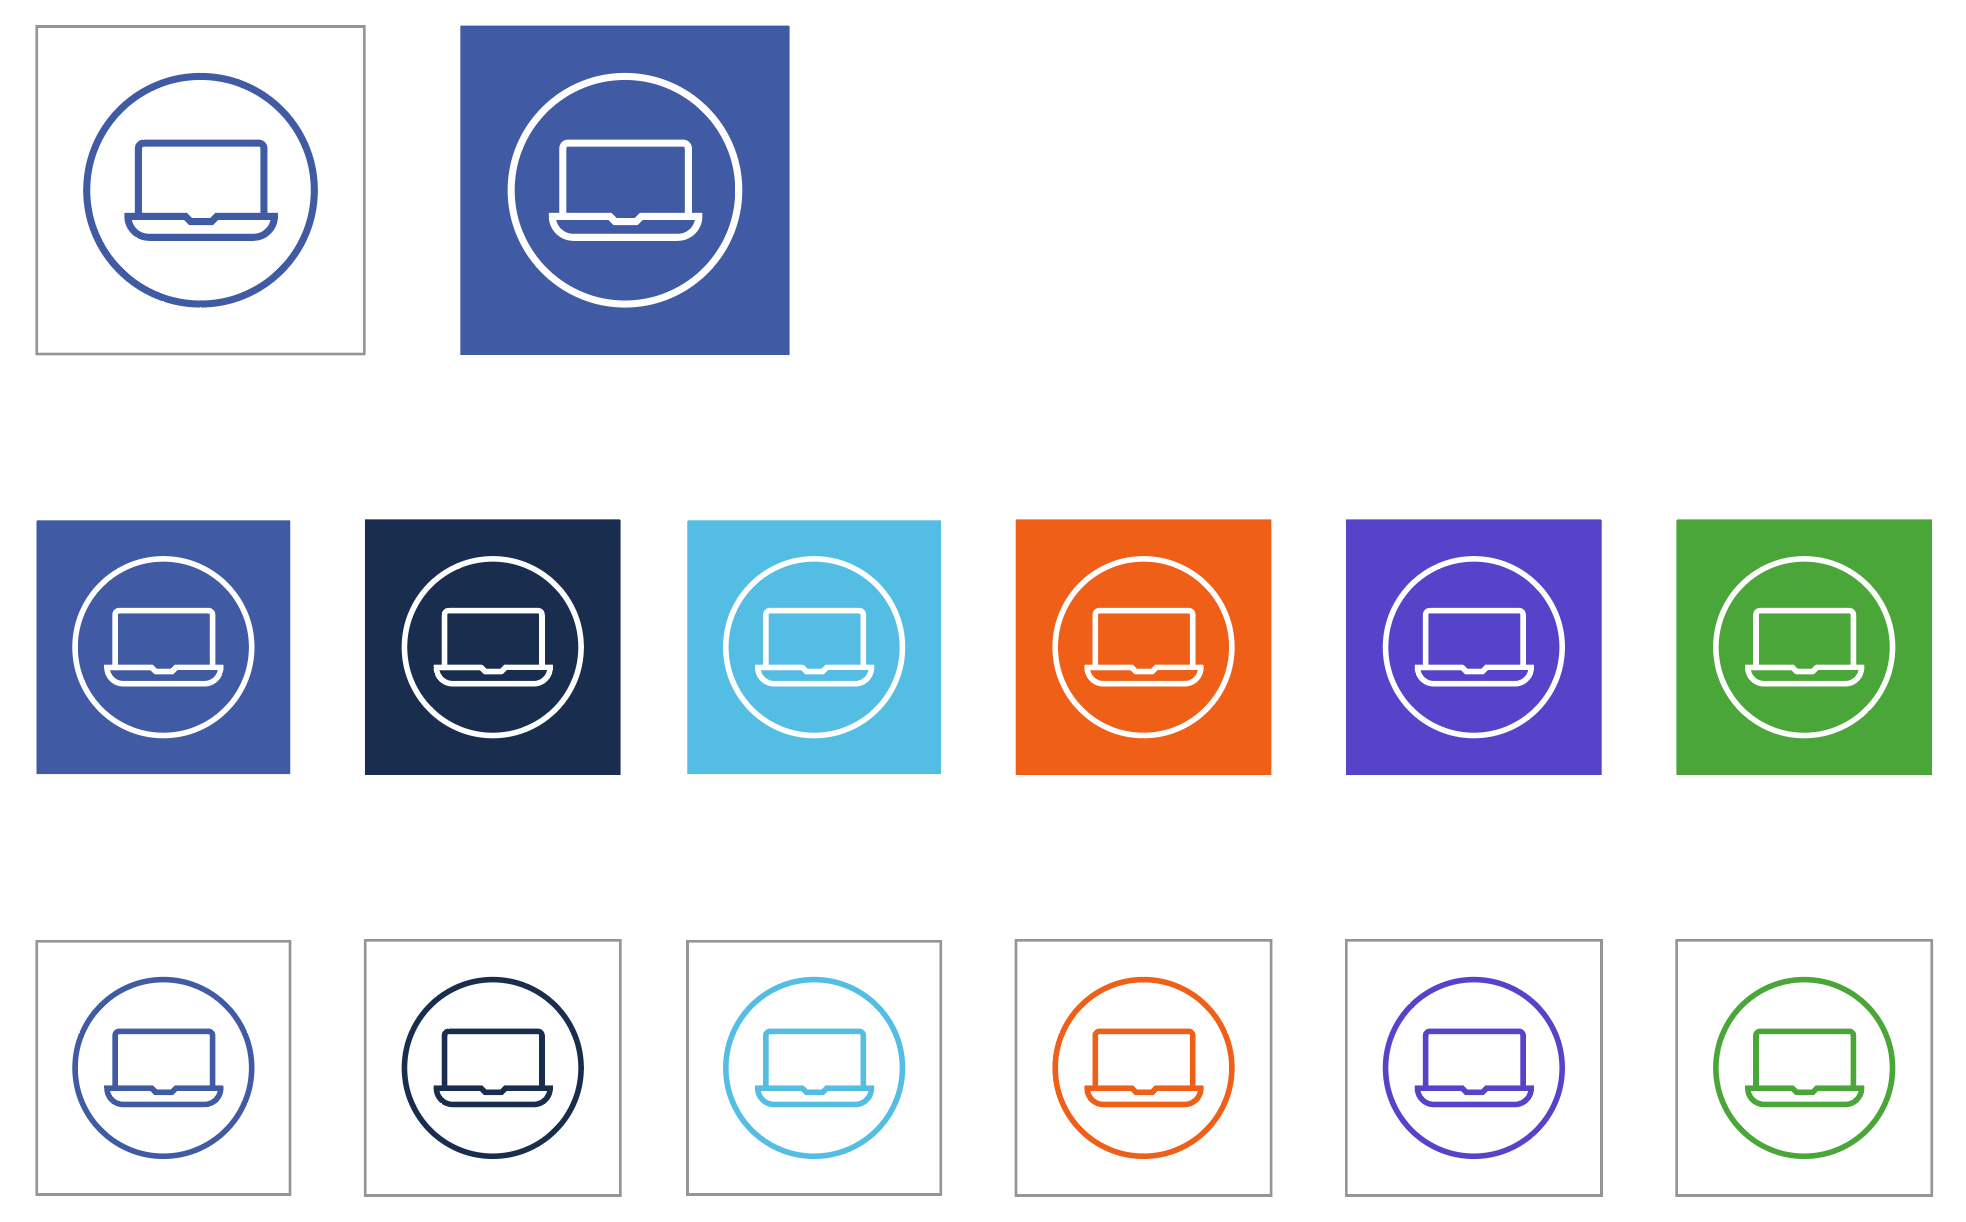 Laptop icon used with the various brand colors